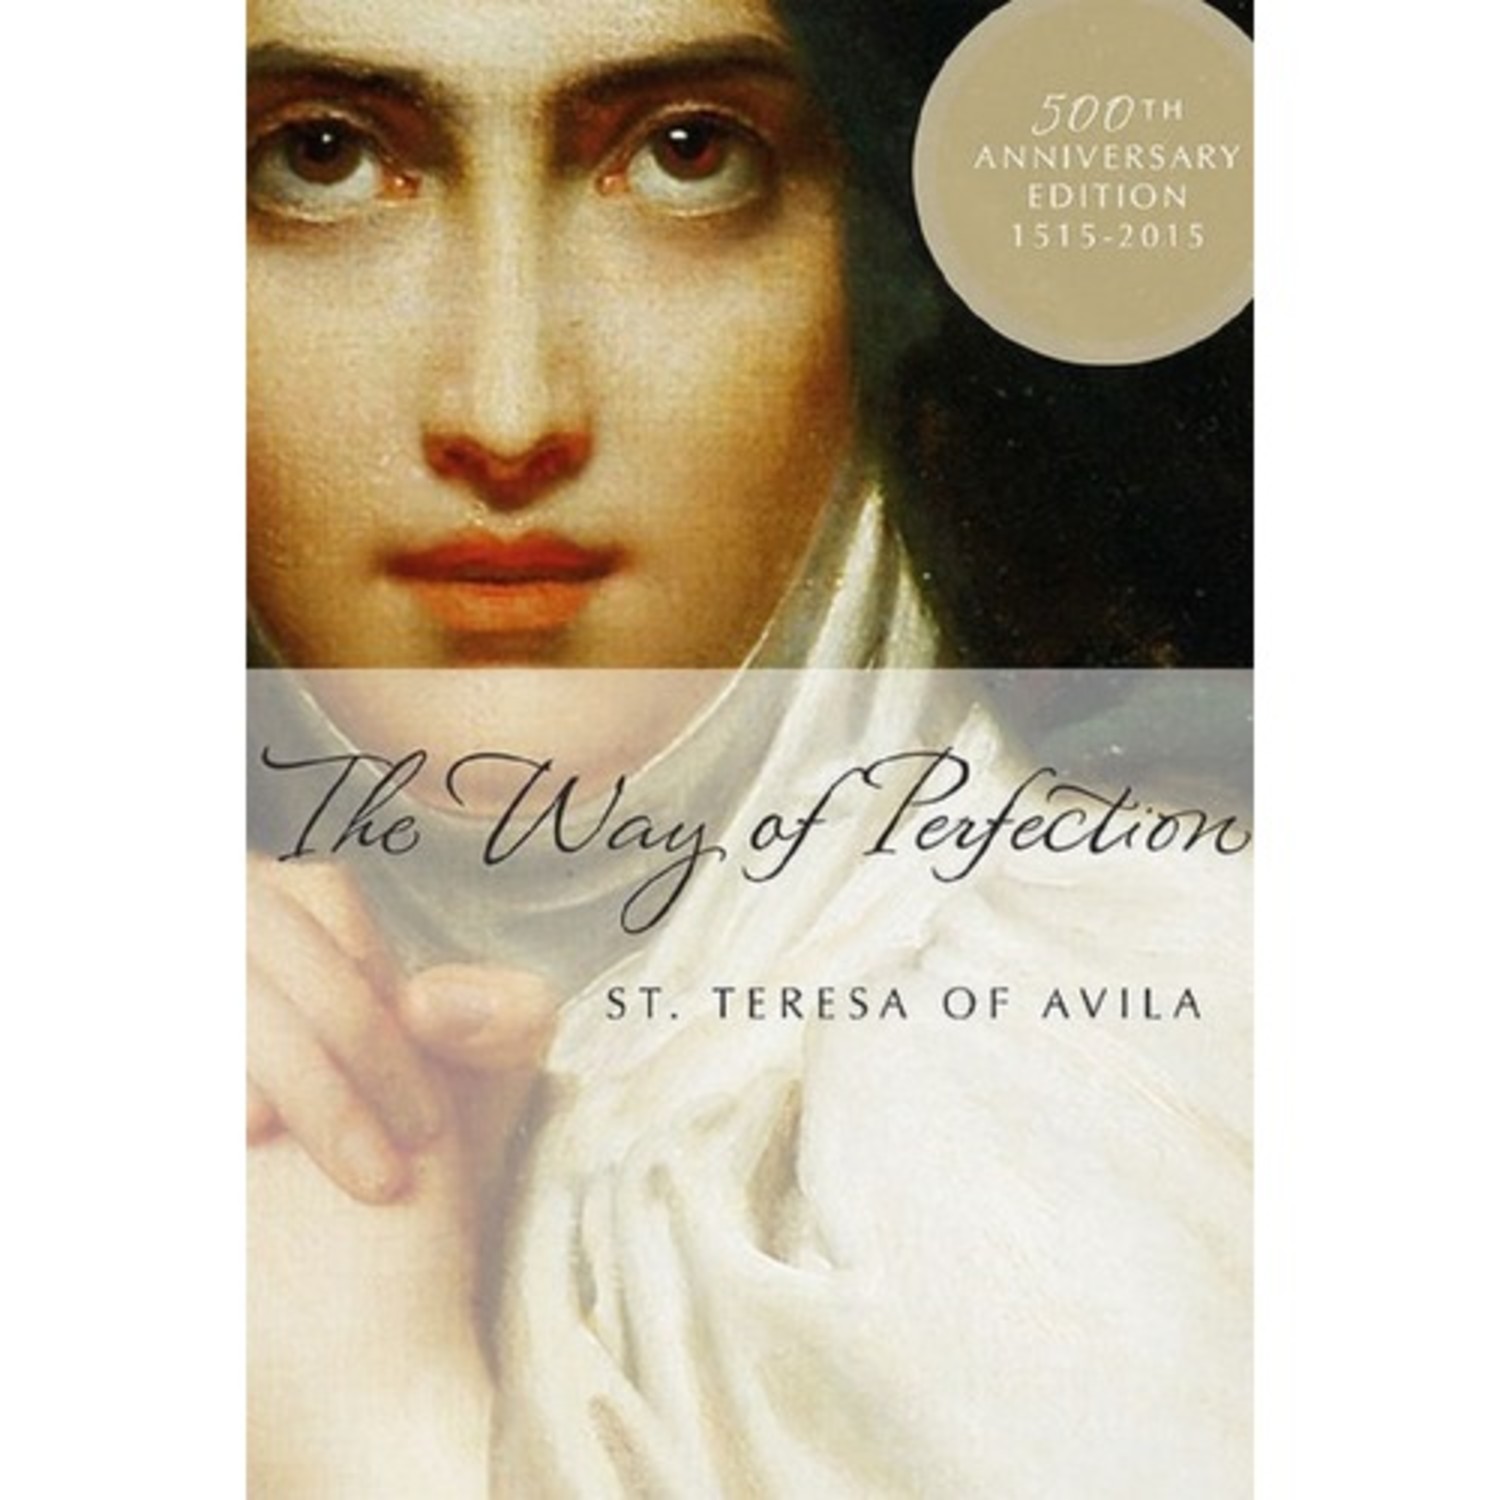 Cover image from the book, The Way of Perfection